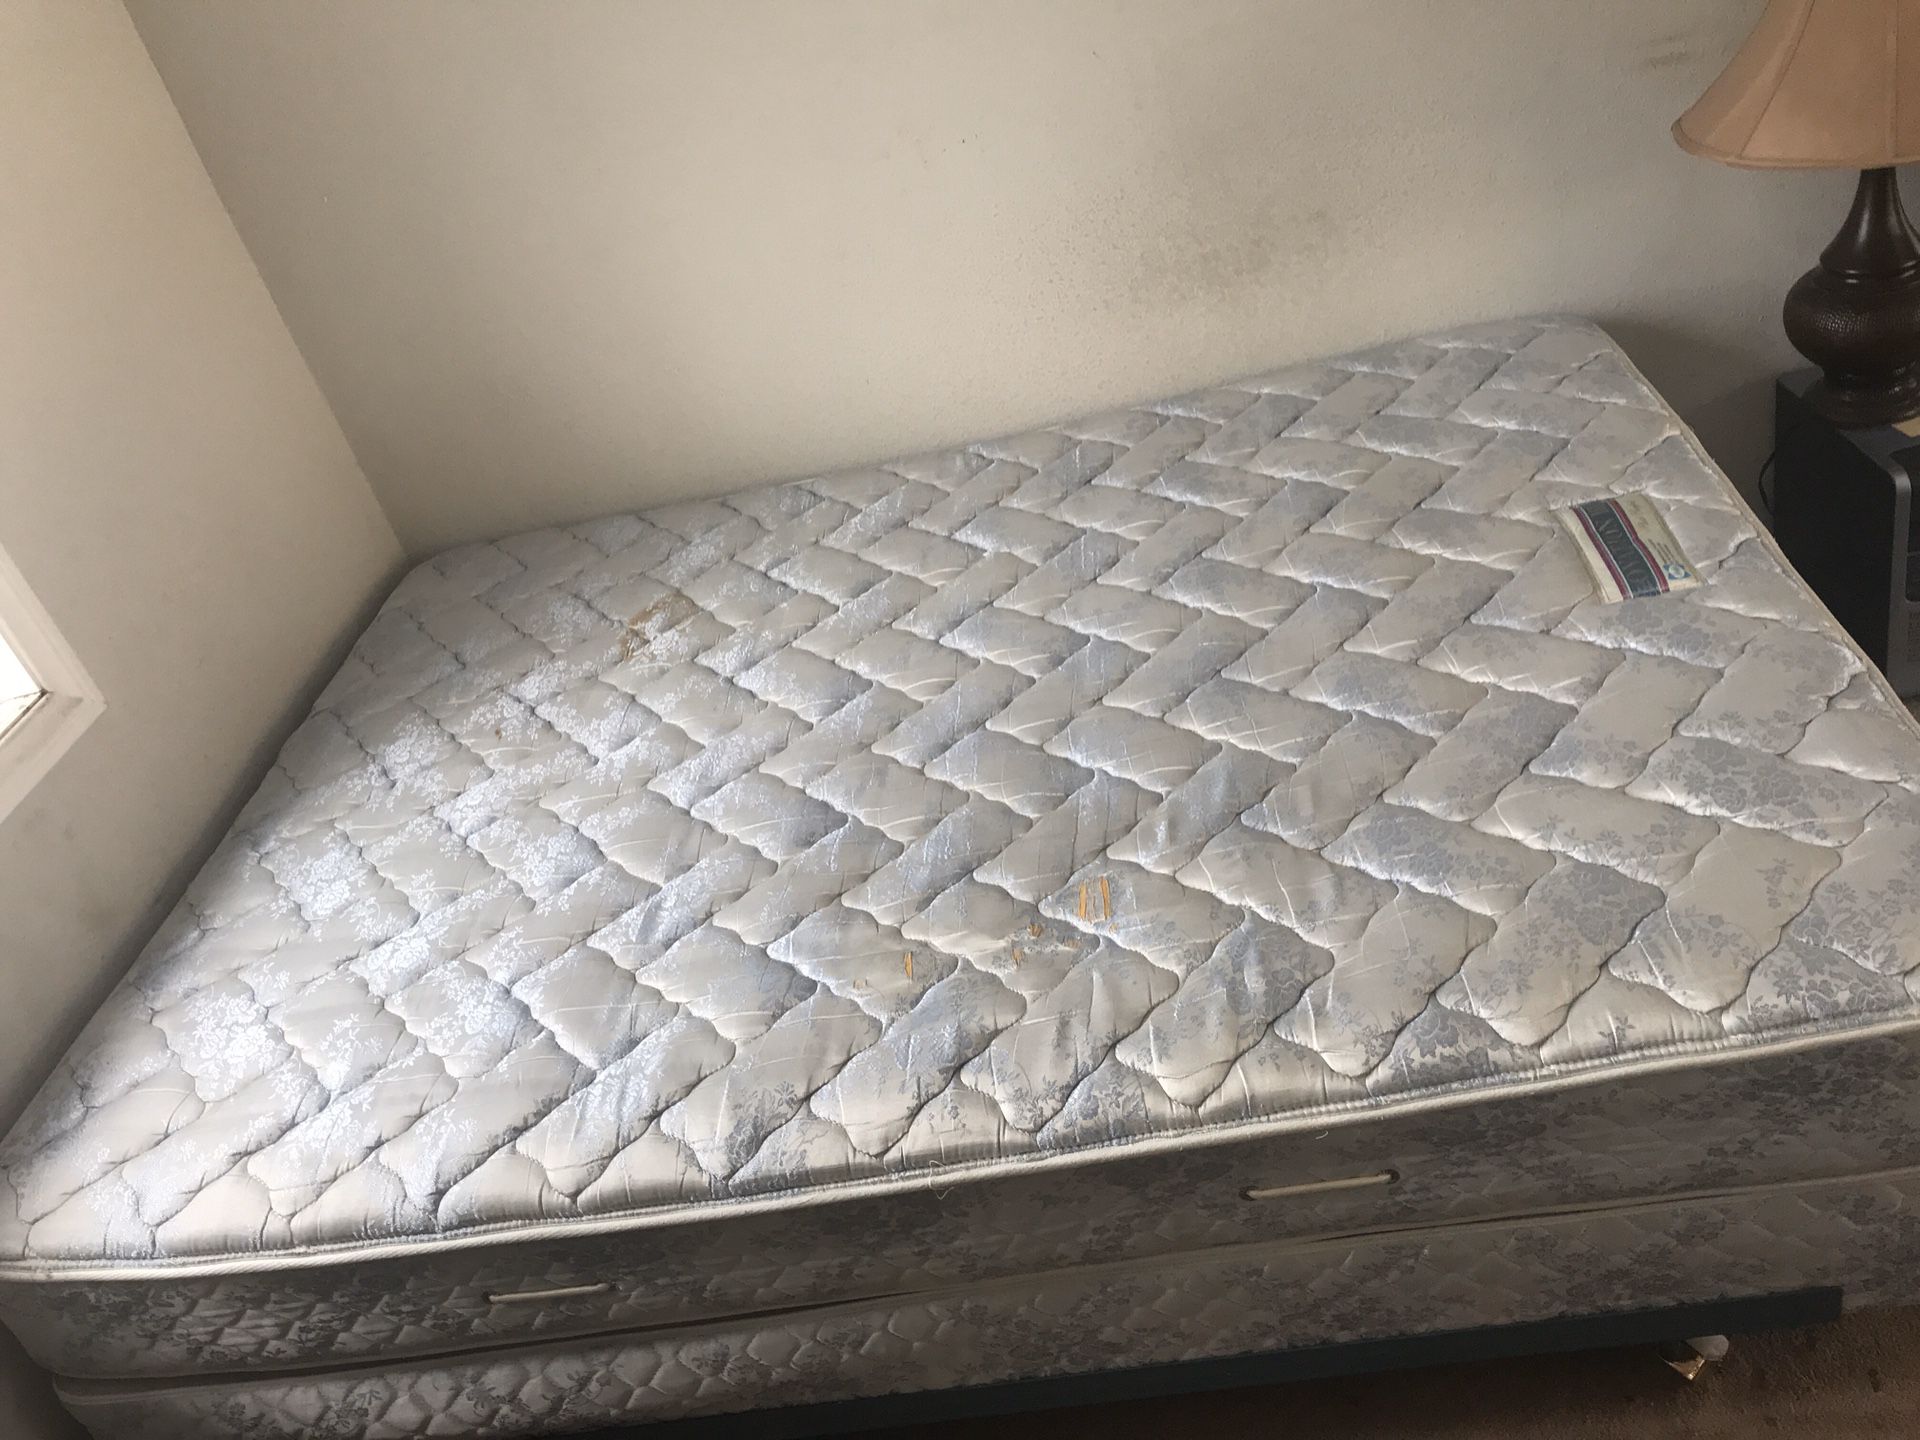 Queen size bed mattress and box sprite